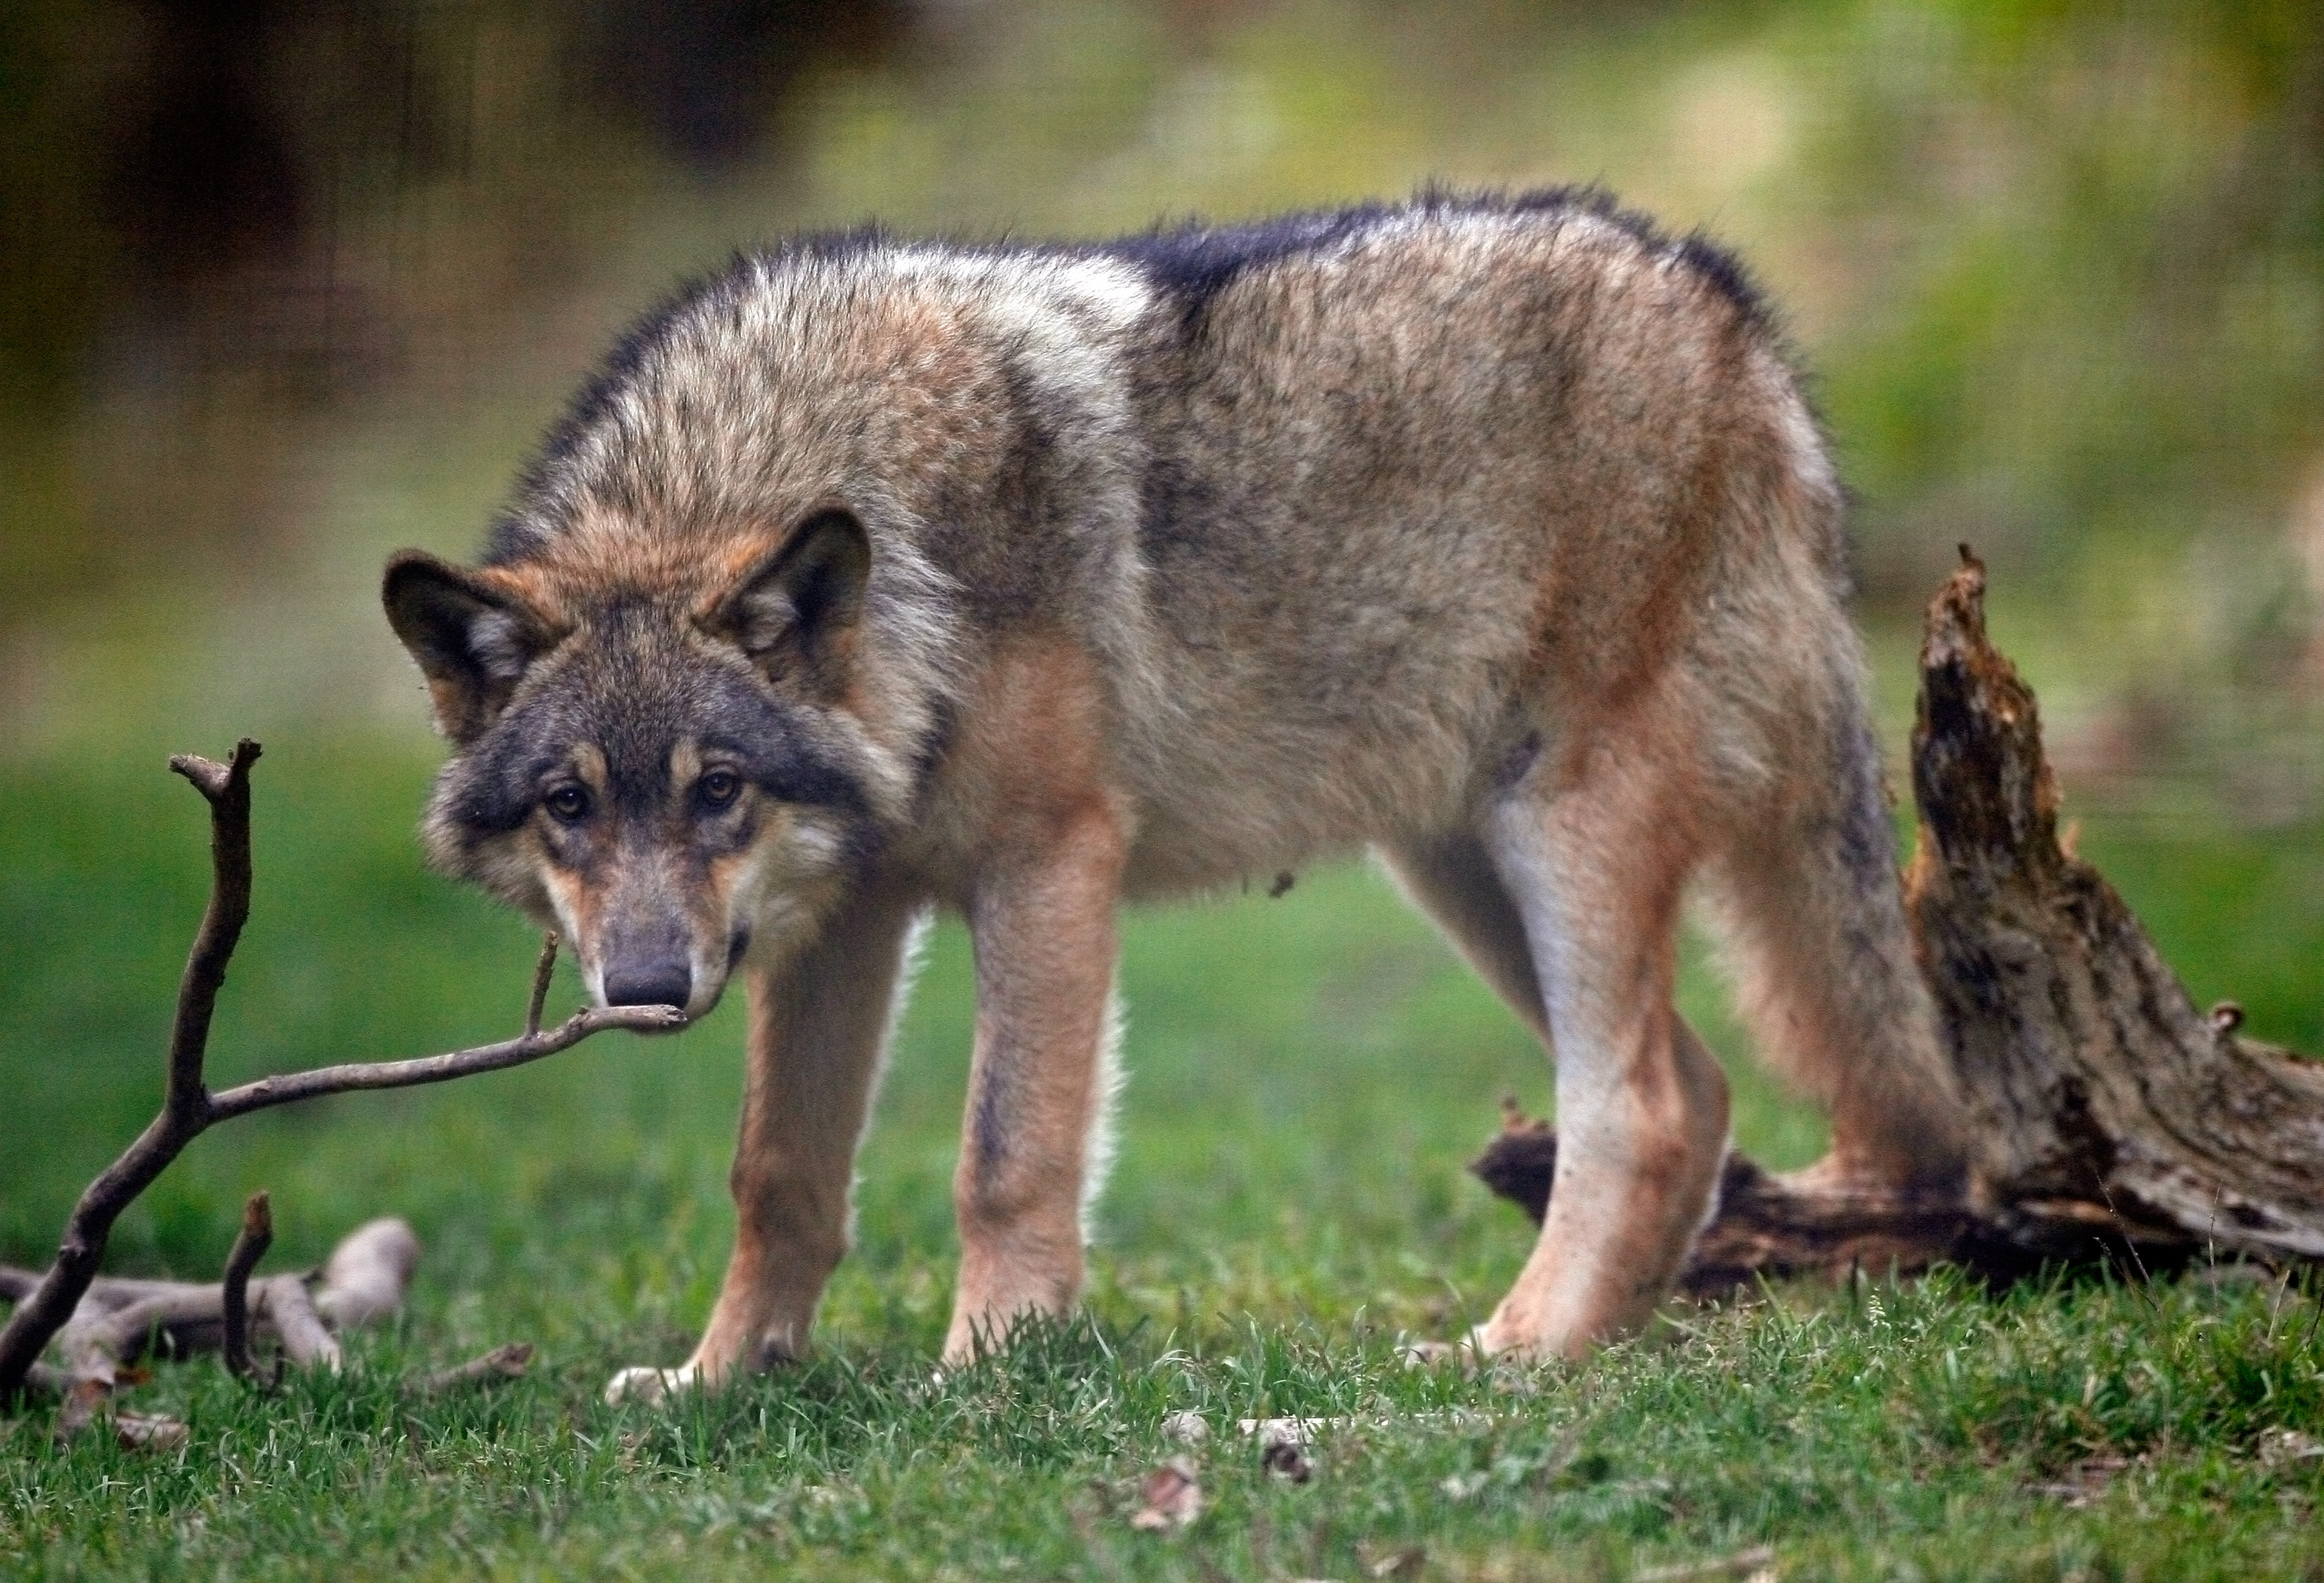 Are wolves a danger to humans? - Quora